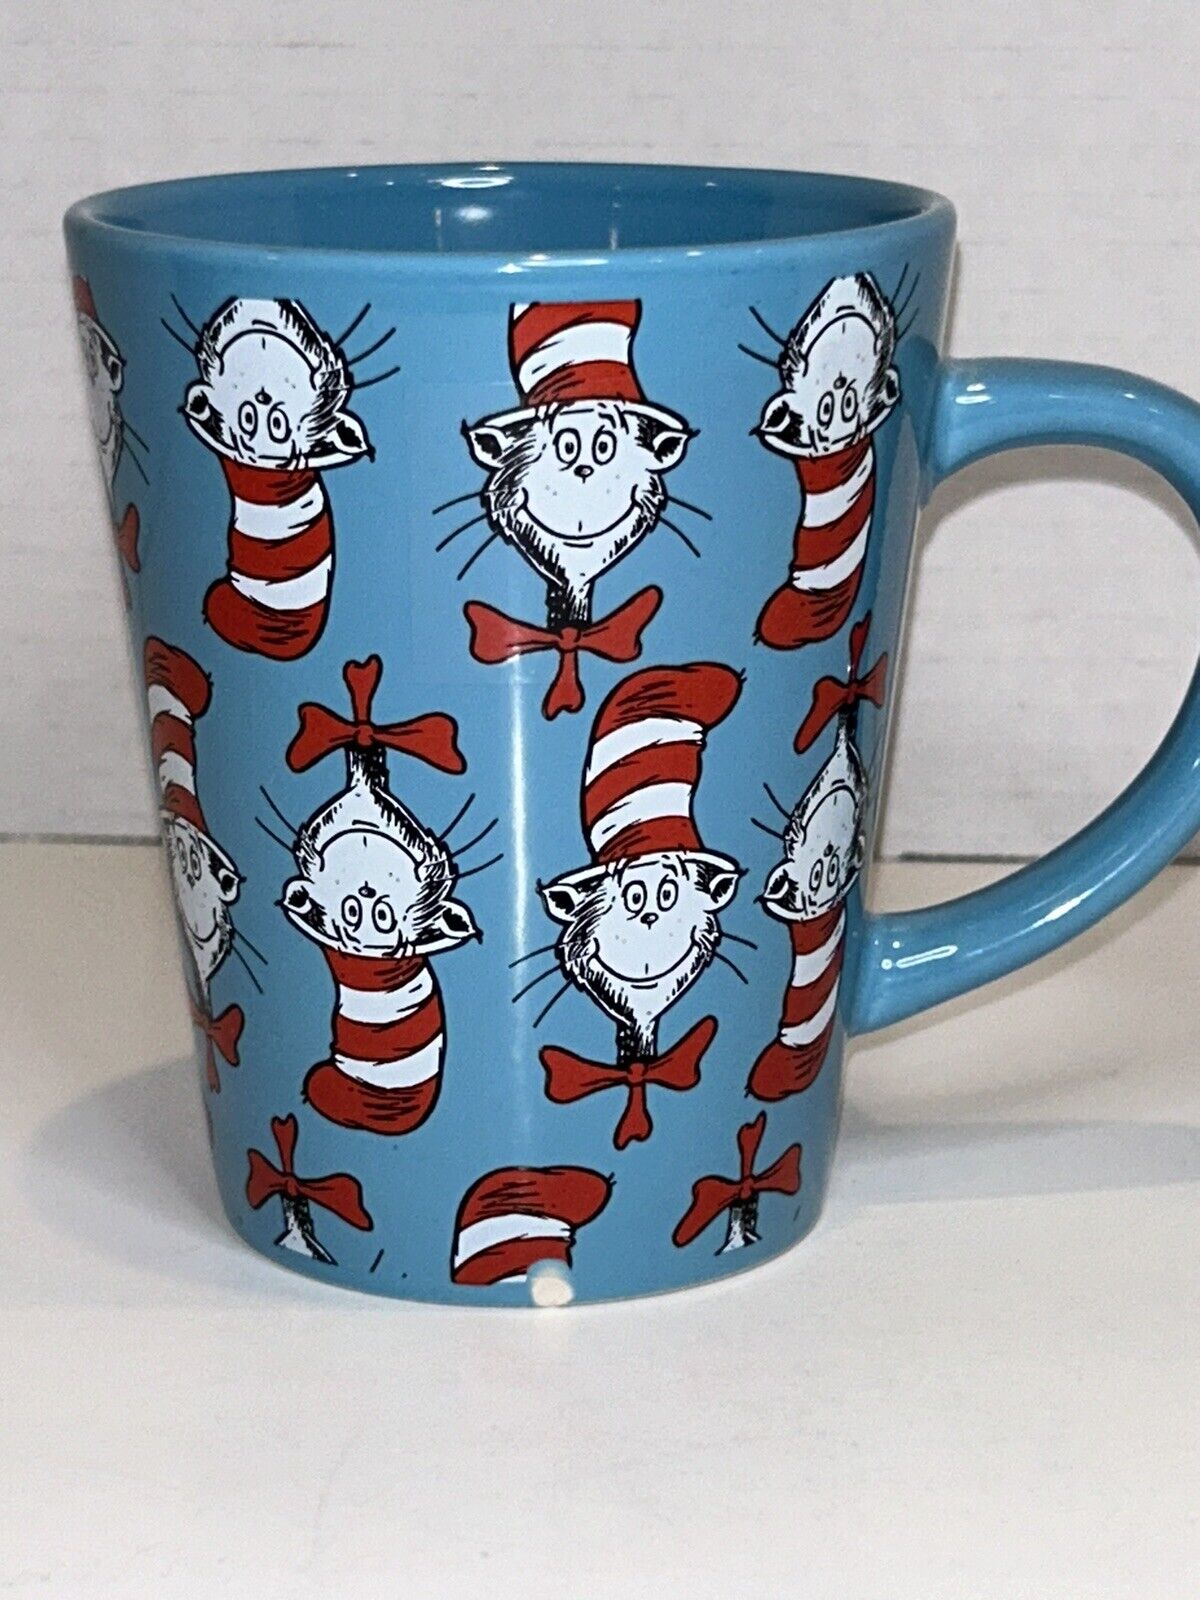 Dr Seuss Cat In The Hat Mug 14 Oz Blue Cup 2021 Turquoise Large